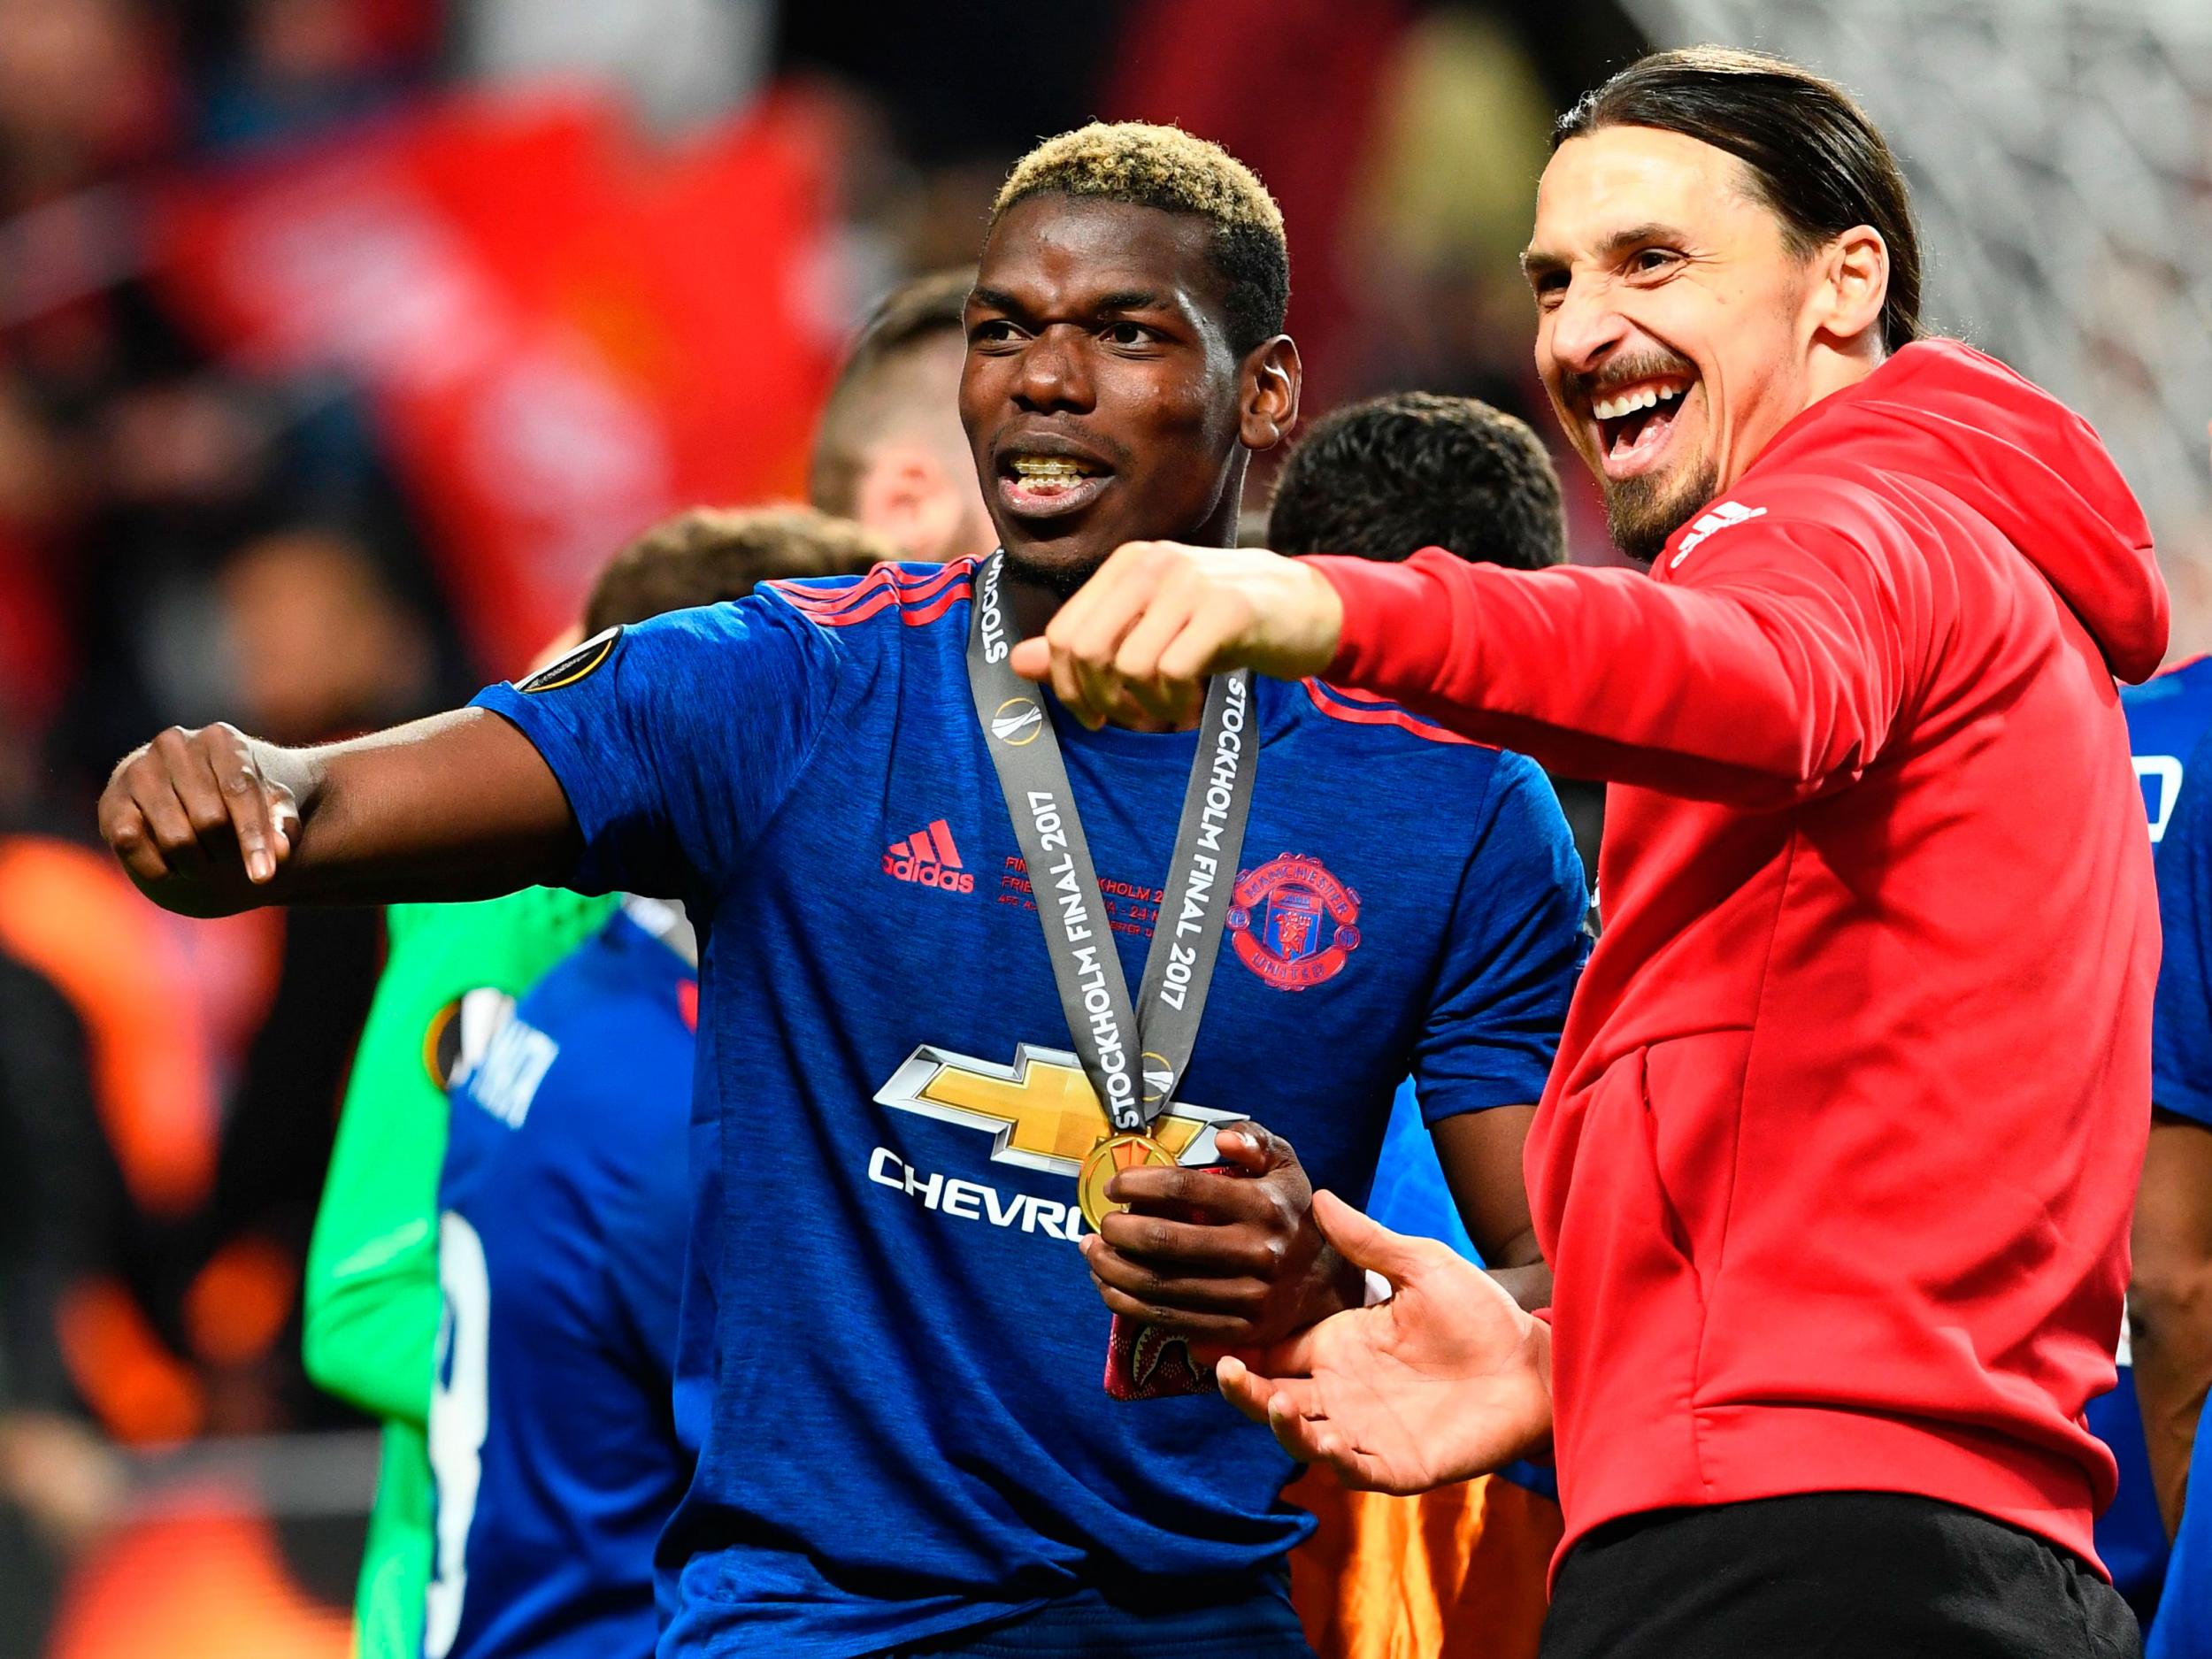 Manchester United trio Paul Pogba, Zlatan Ibrahimovic and Marcos Rojo available to play against Newcastle